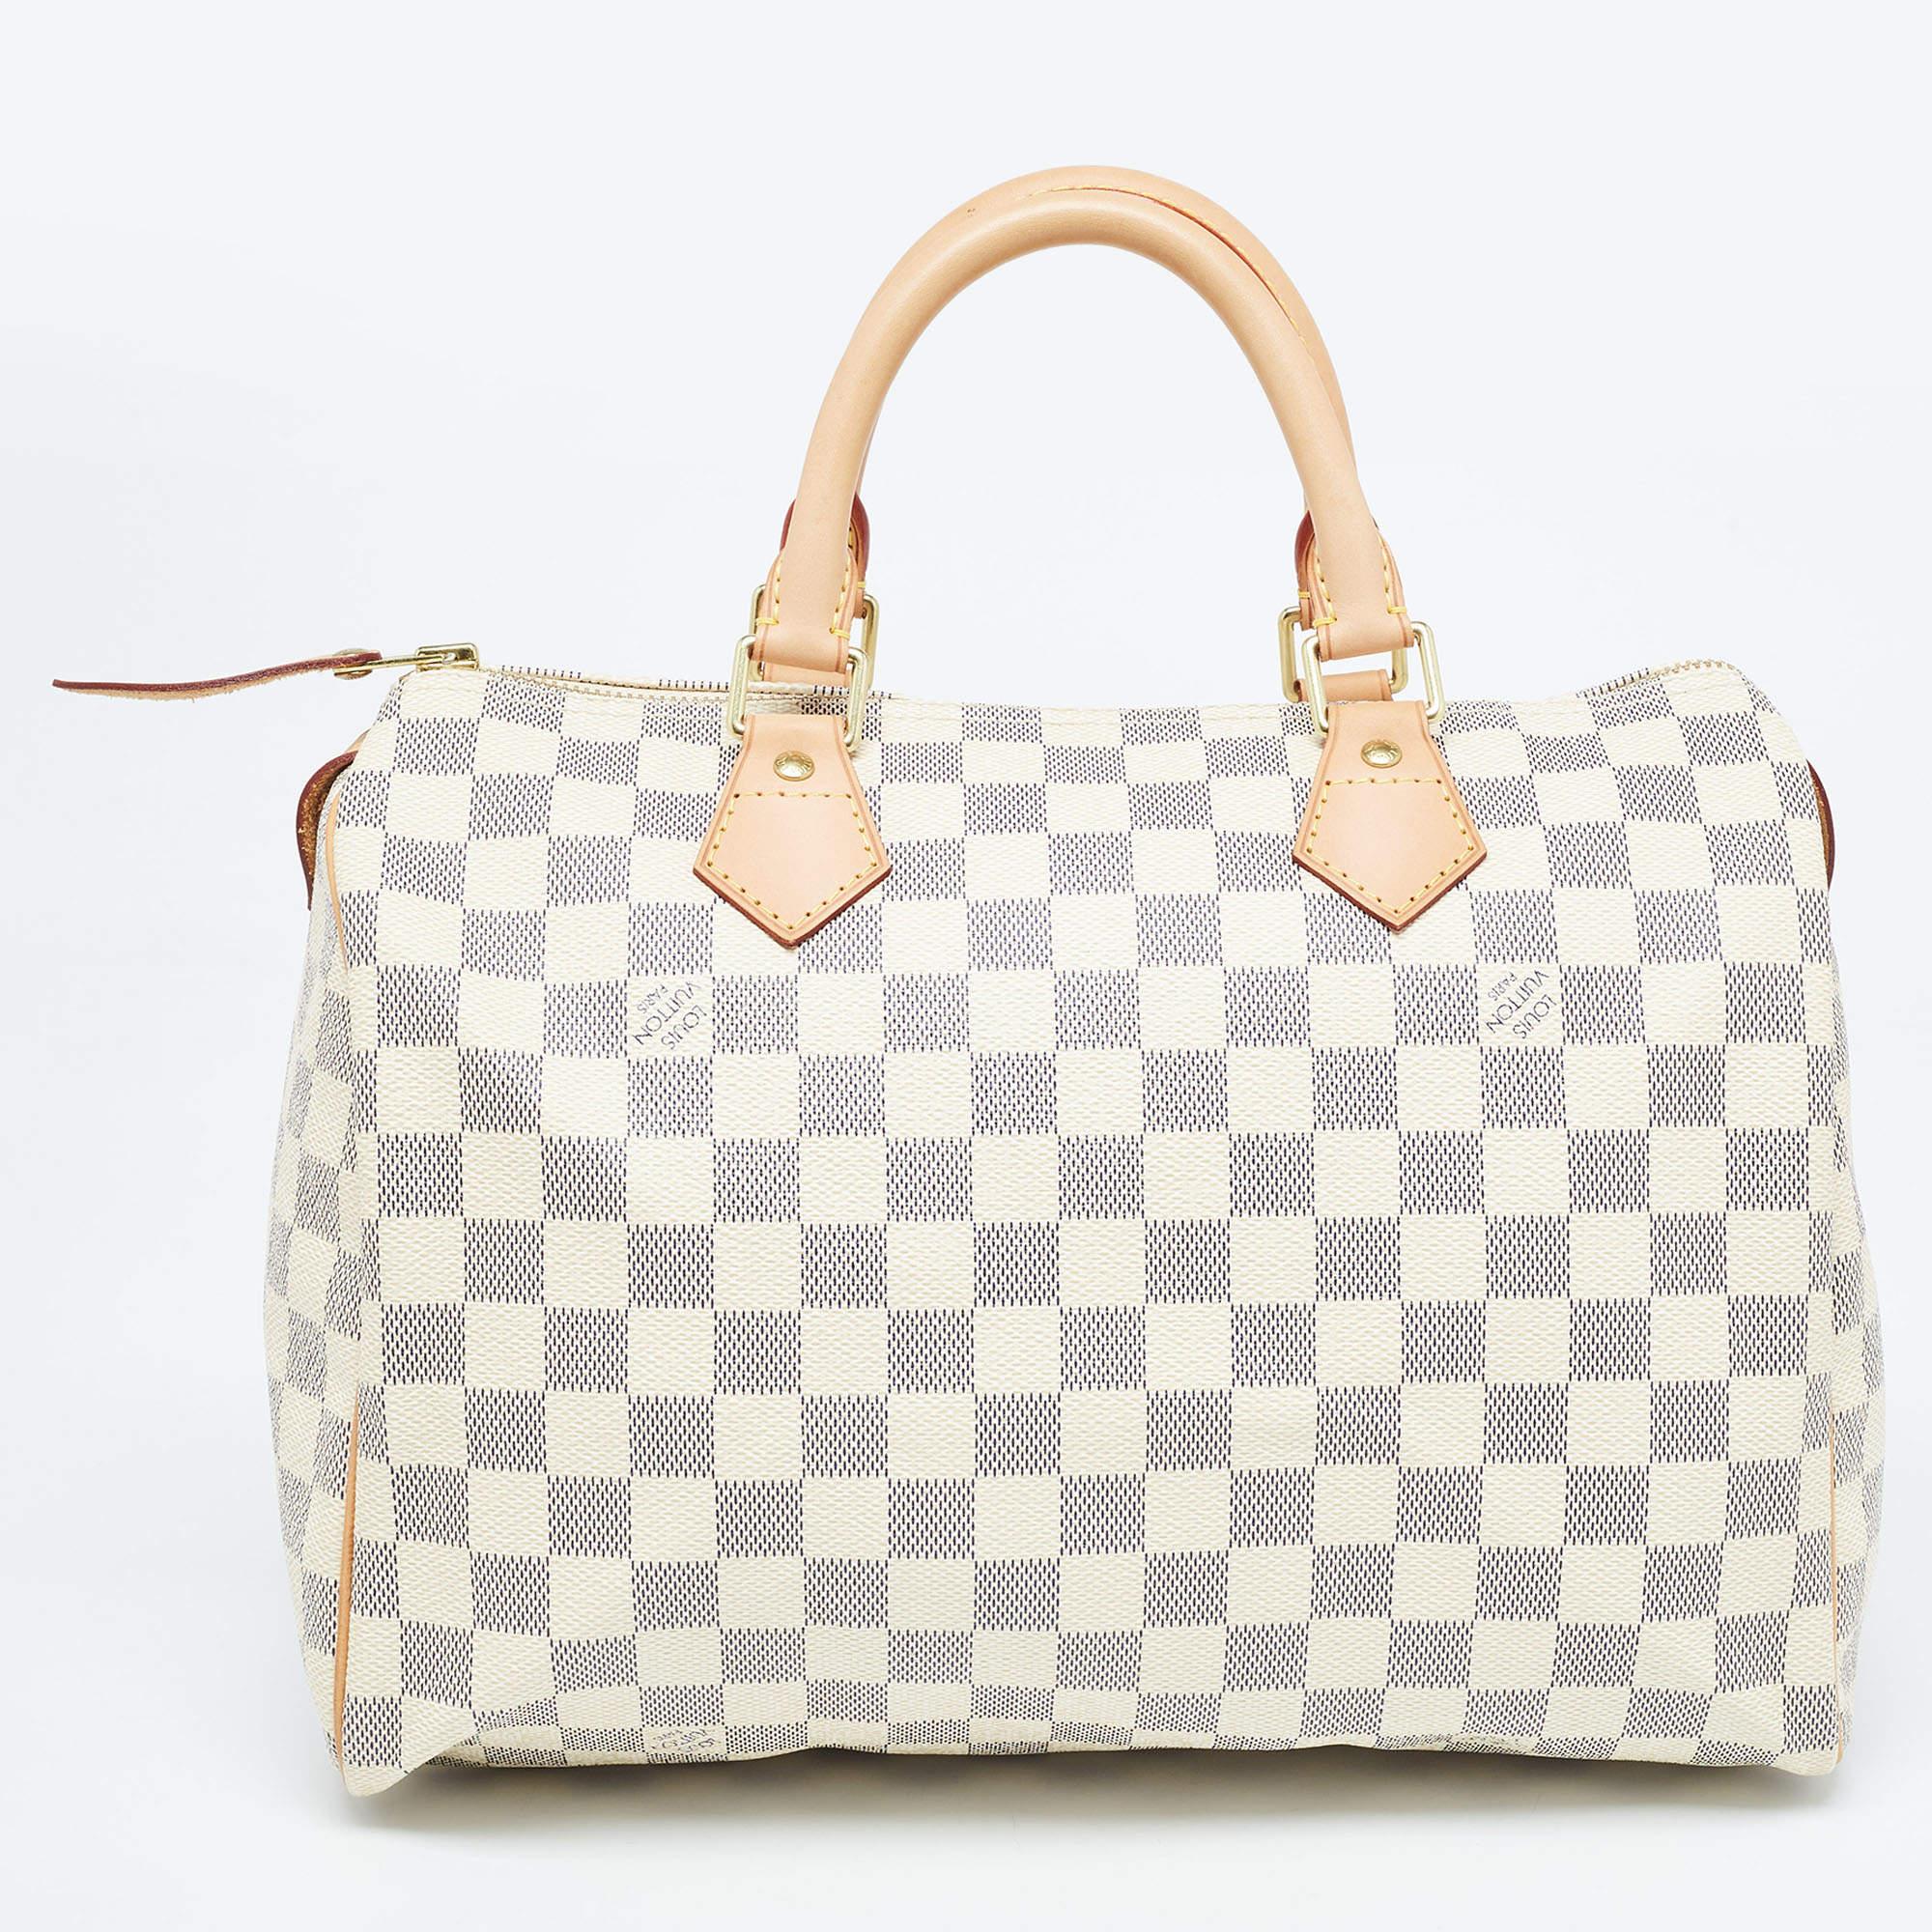 Created to provide you with everyday ease, this Louis Vuitton Speedy 30 bag features dual top handles and a roomy canvas-lined interior. The usage of the signature Damier Azur canvas in its construction offers instant brand identification. Gold-tone